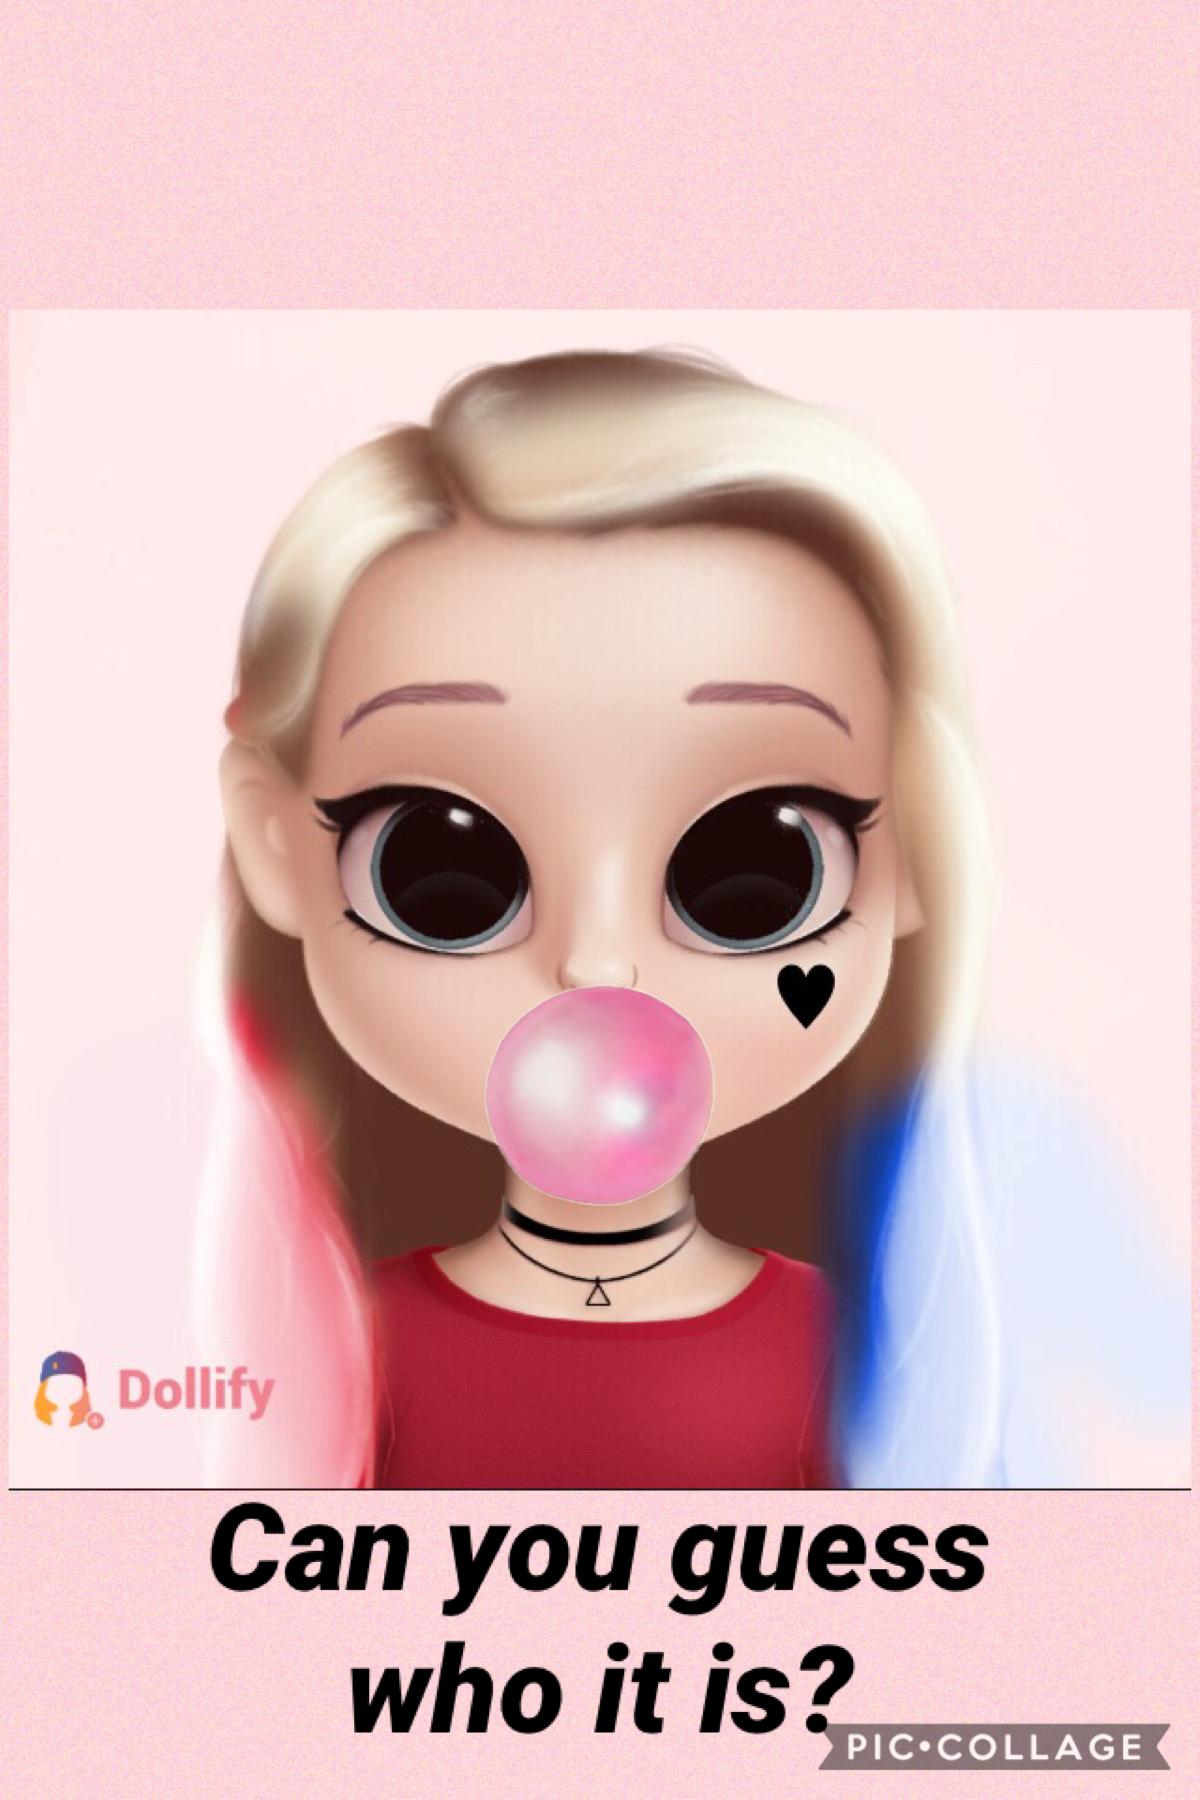 Whoever can guess who this dollify is of gets a shout out!